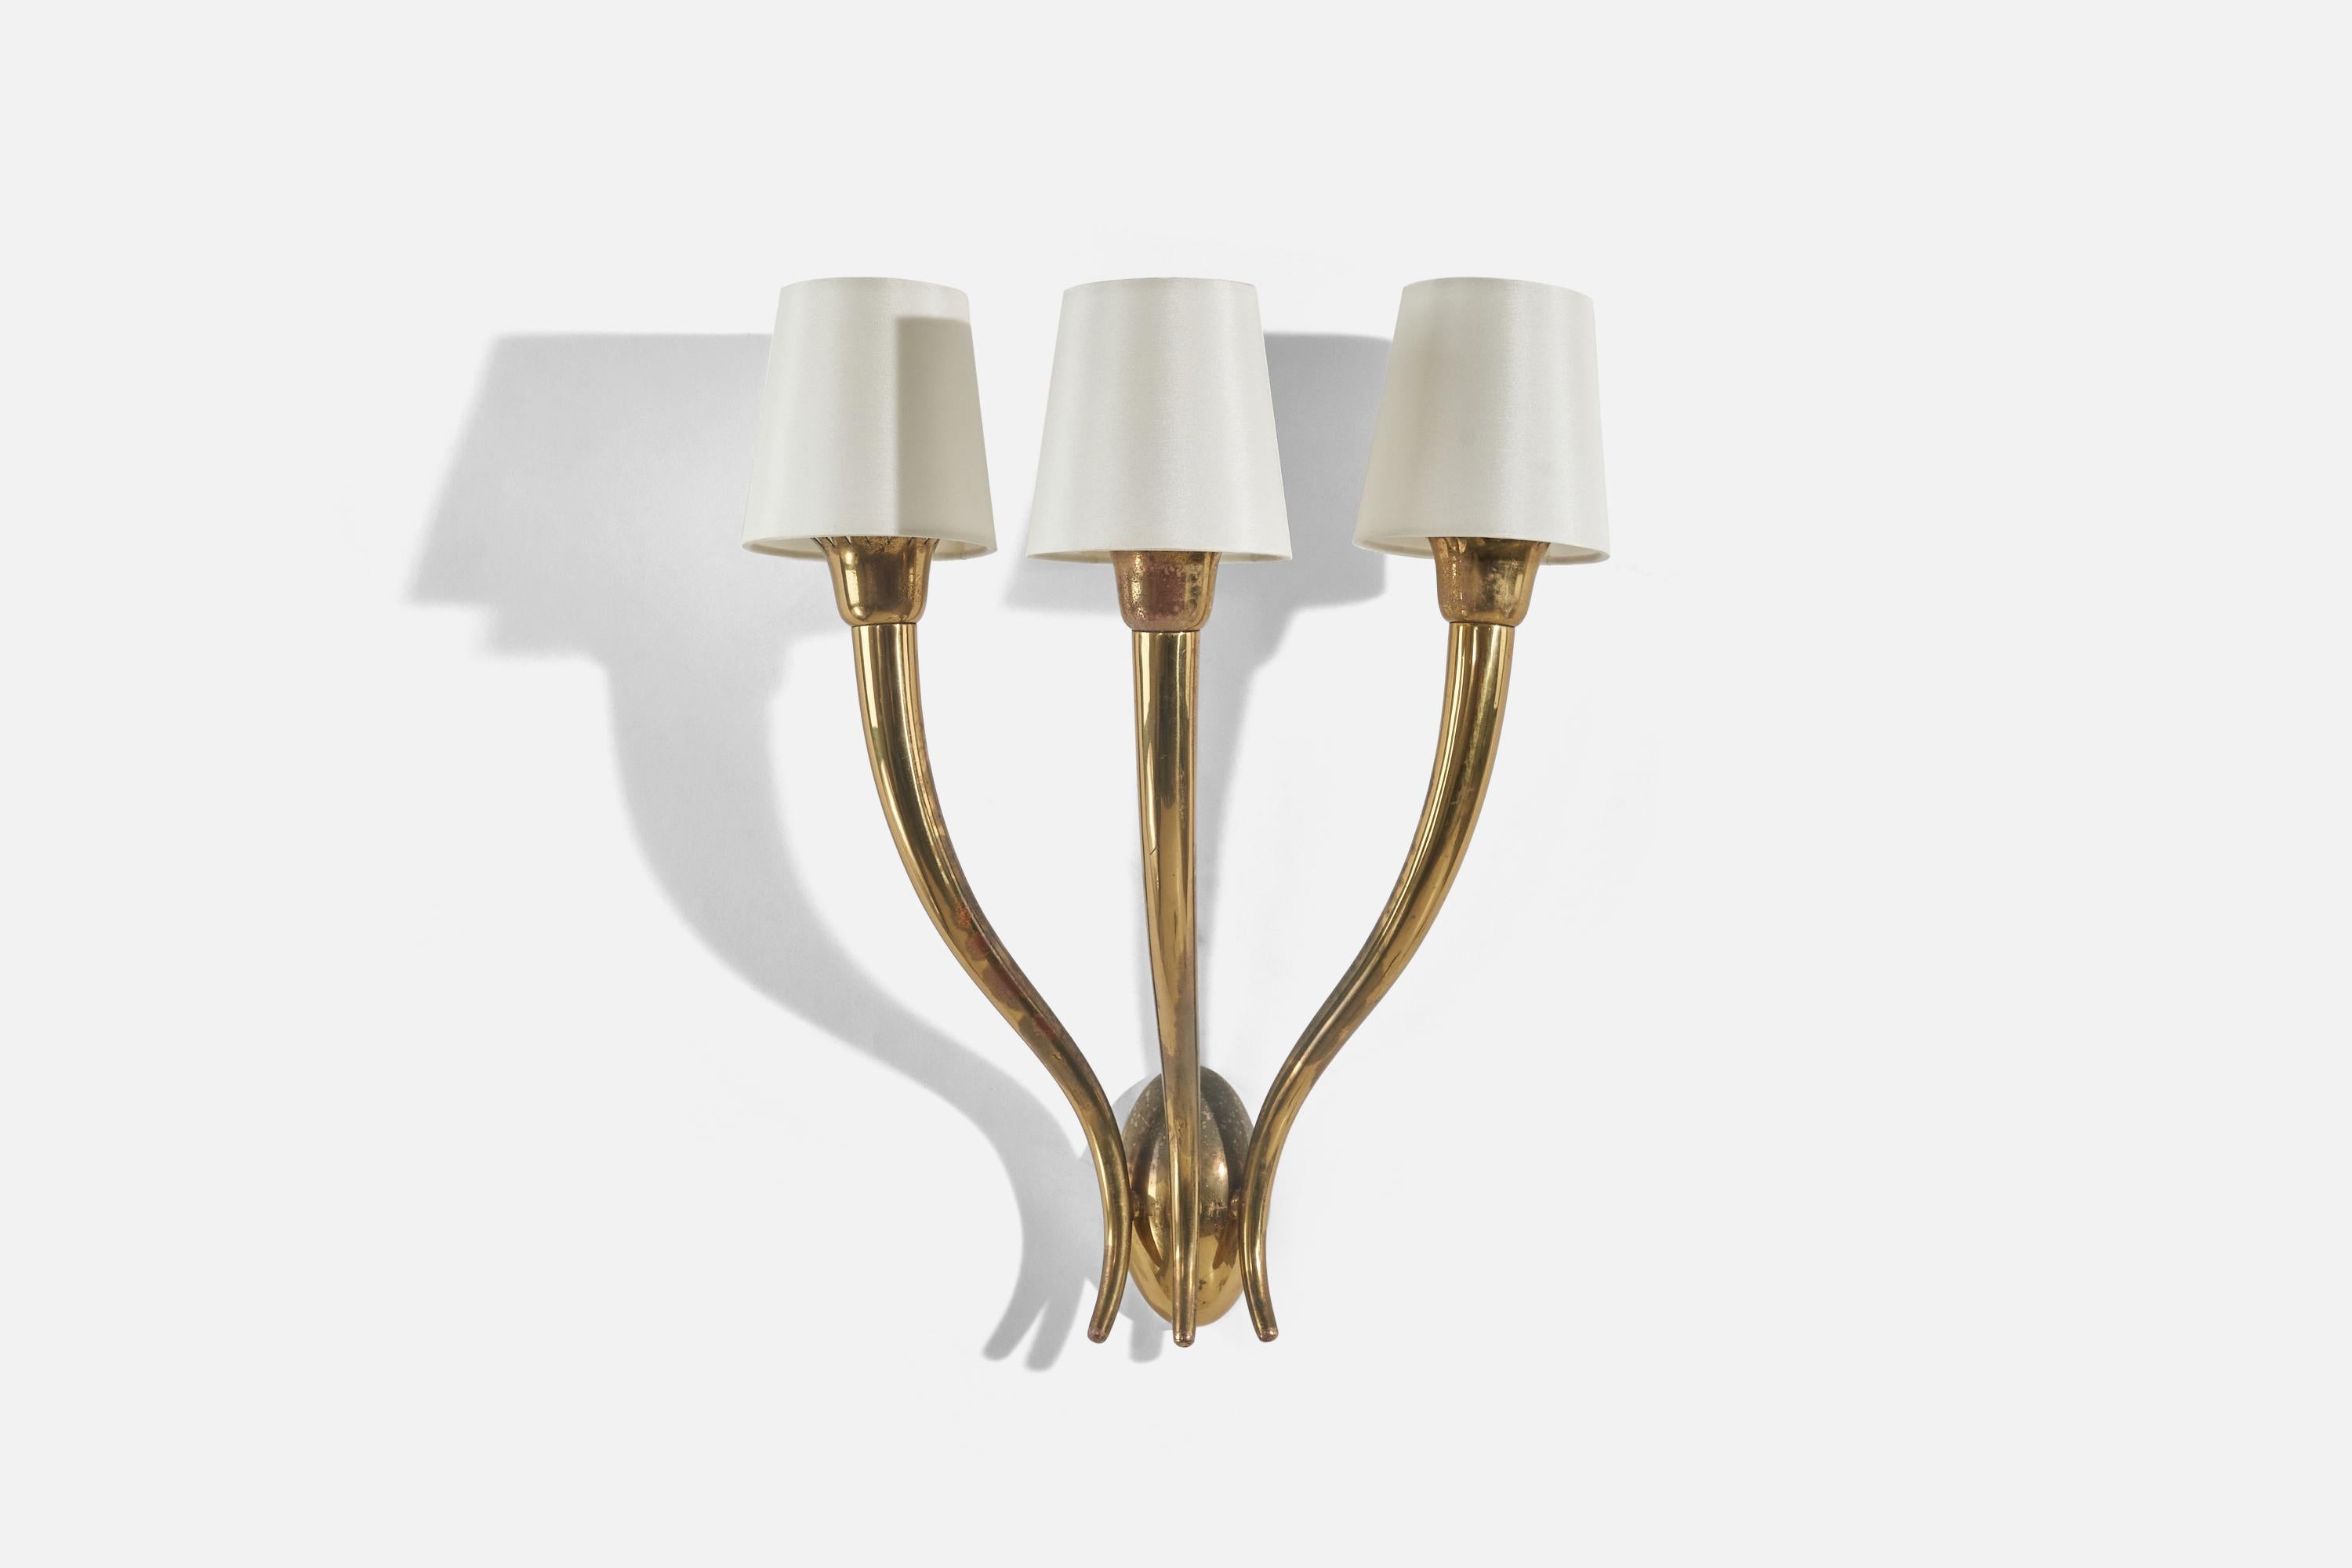 A pair of brass and silk sconces; design and production attributed to Guglielmo Ulrich, Italy, 1940s. 

Sold with Lampshades. Dimensions stated are of Sconce with lampshades.

Dimensions of Back Plate (inches) : 4.47 x 2.65 x 1.27 (Height x Width x